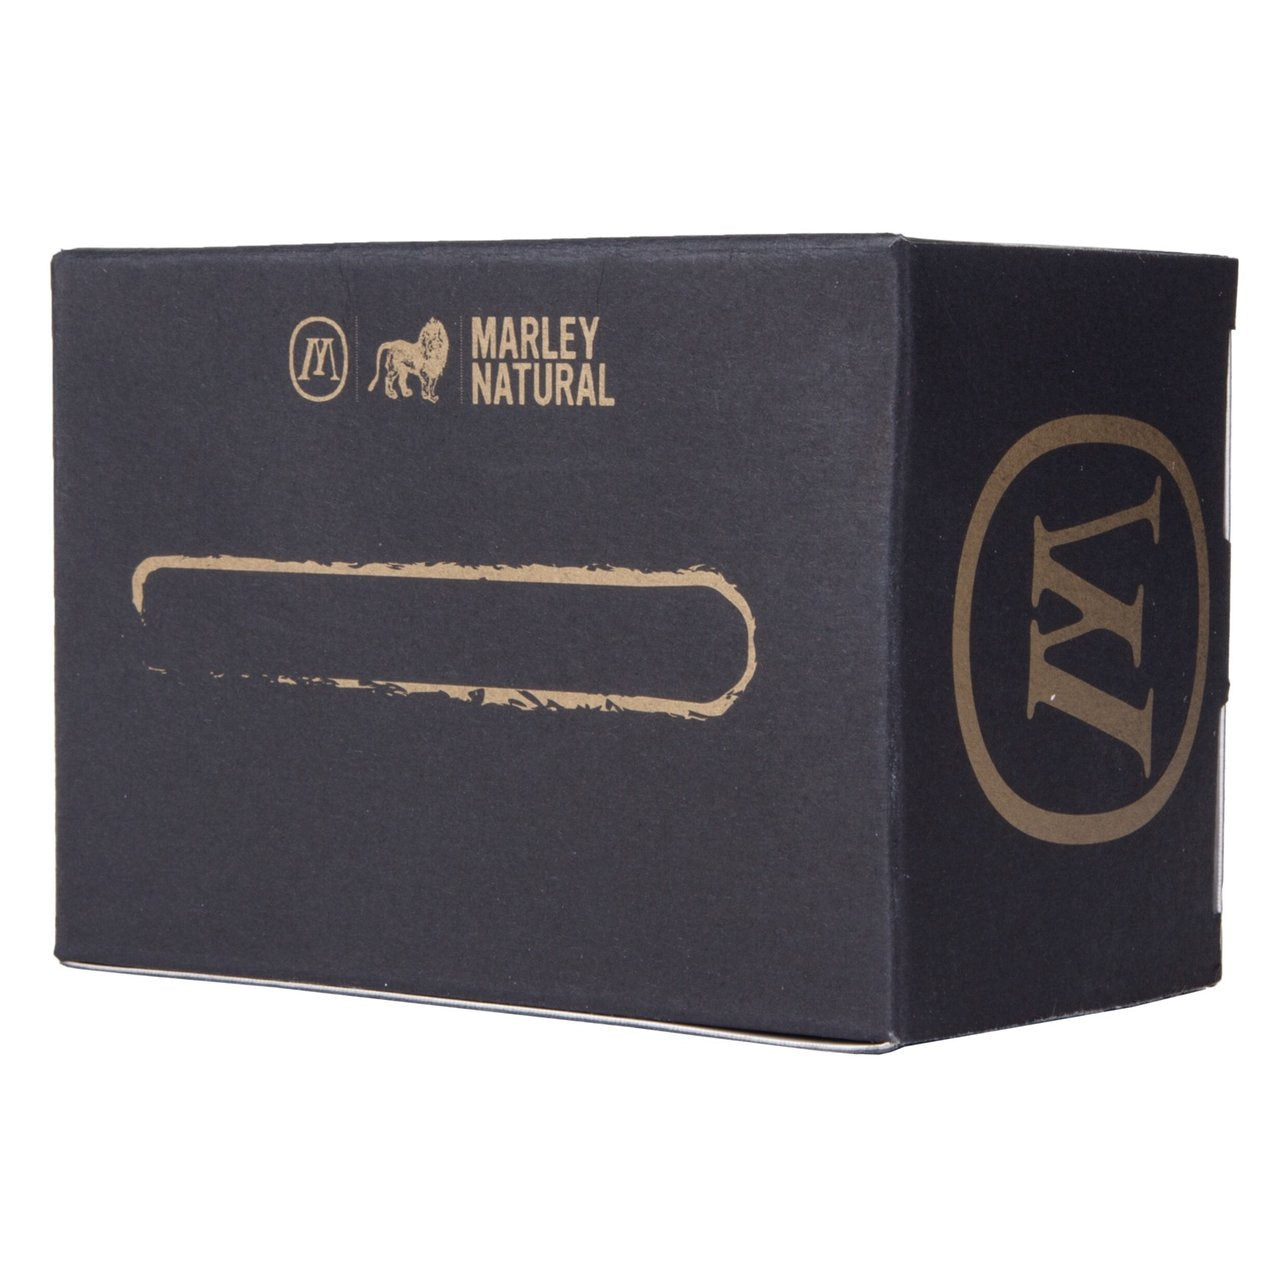 Marley Natural Smoked Glass Taster Pipe by Marley Natural | Mission Dispensary